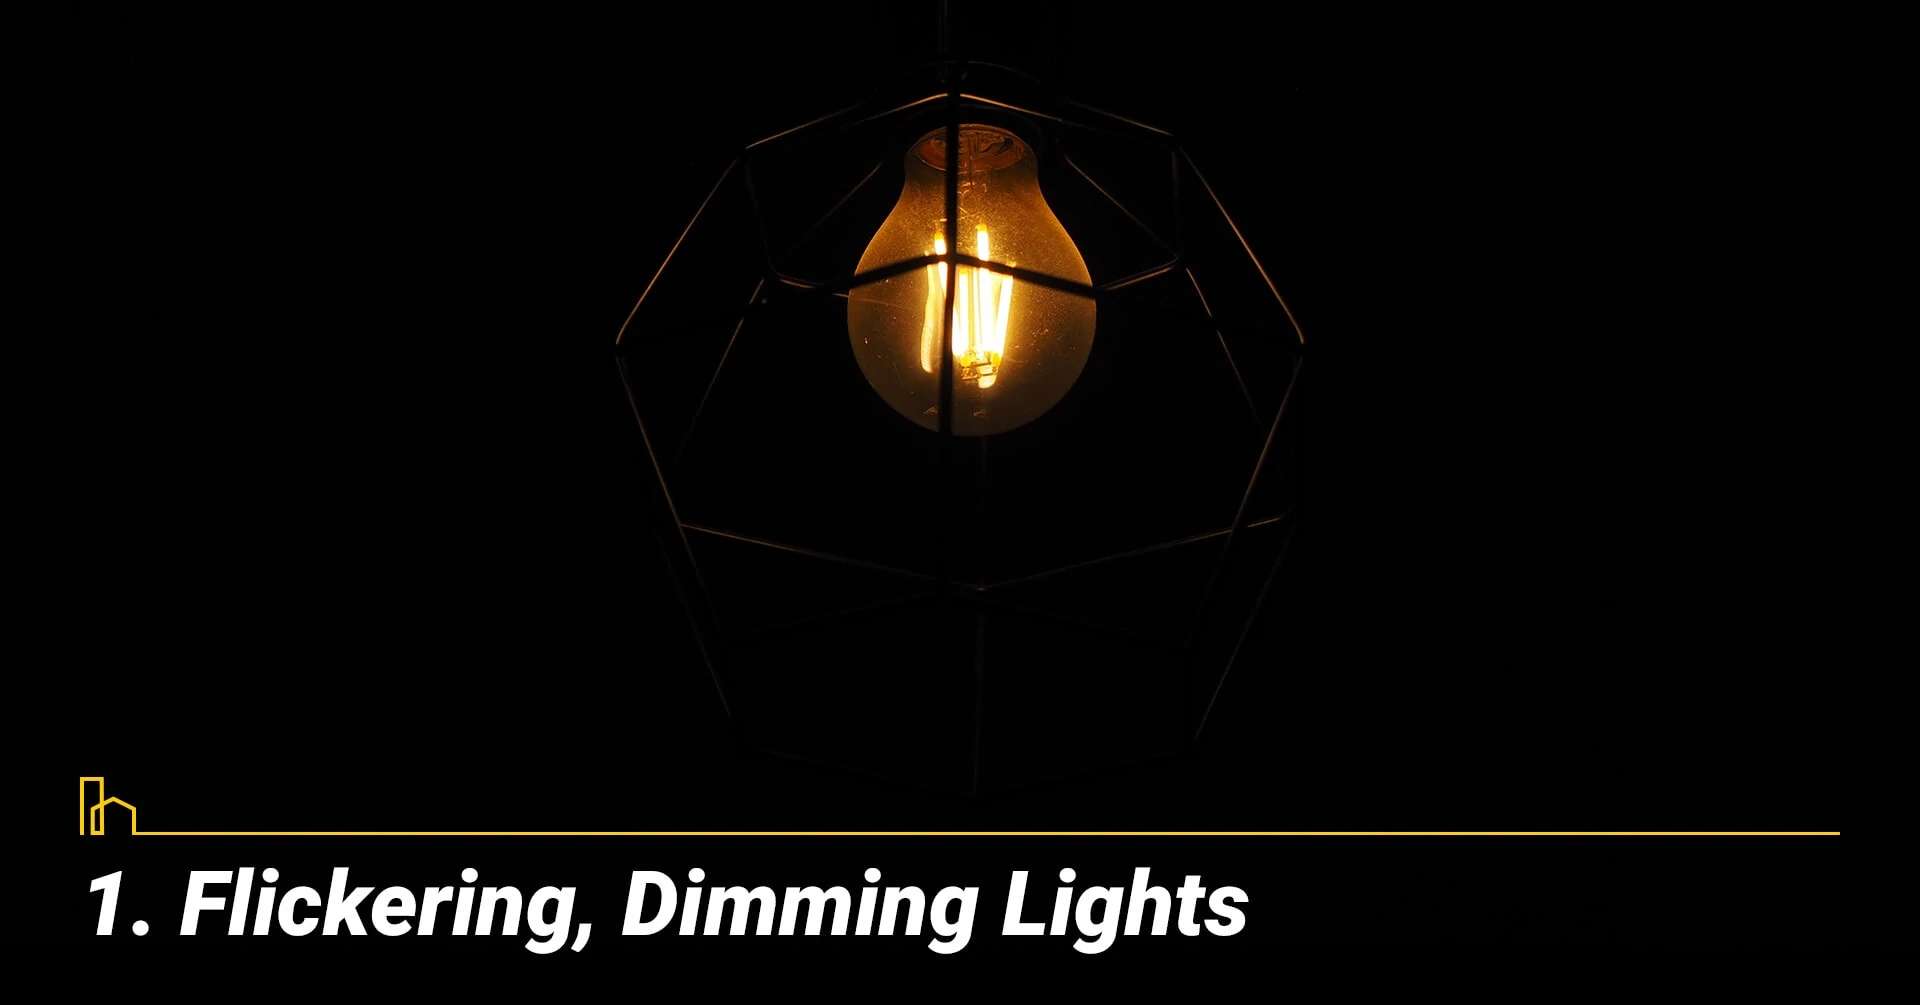 Flickering and Dimming Lights around the house